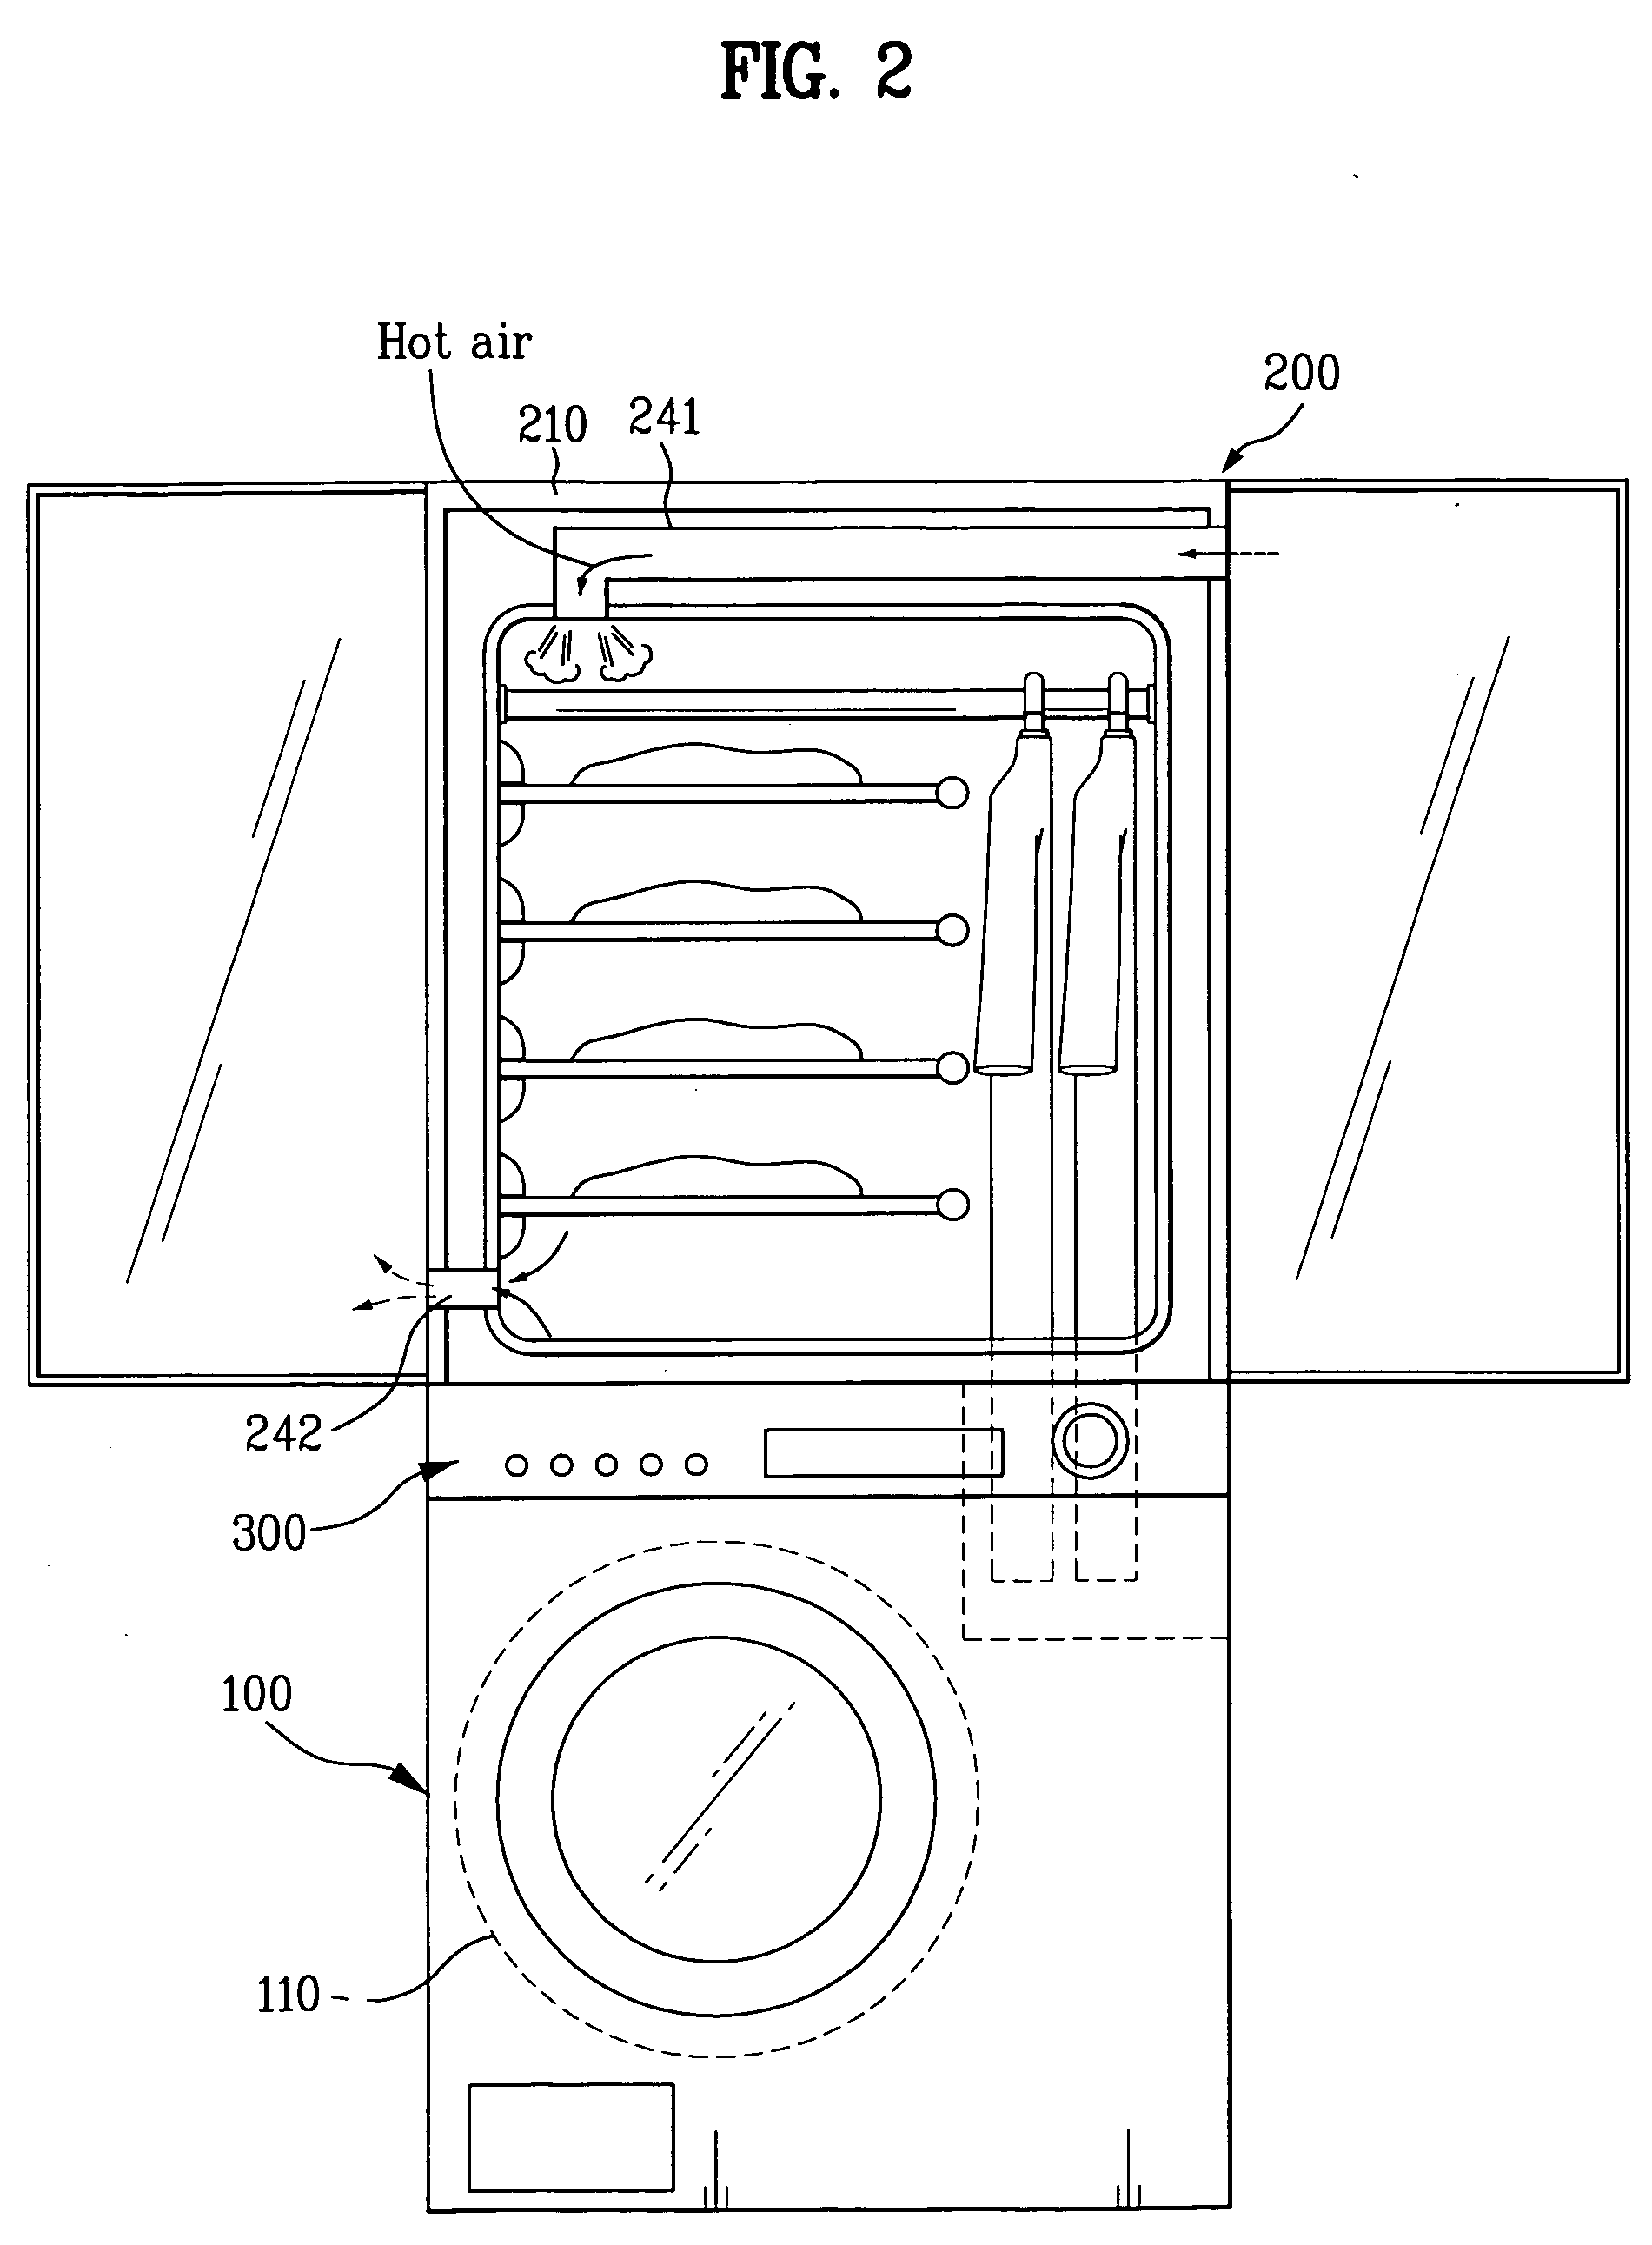 Operation method for combination dryer